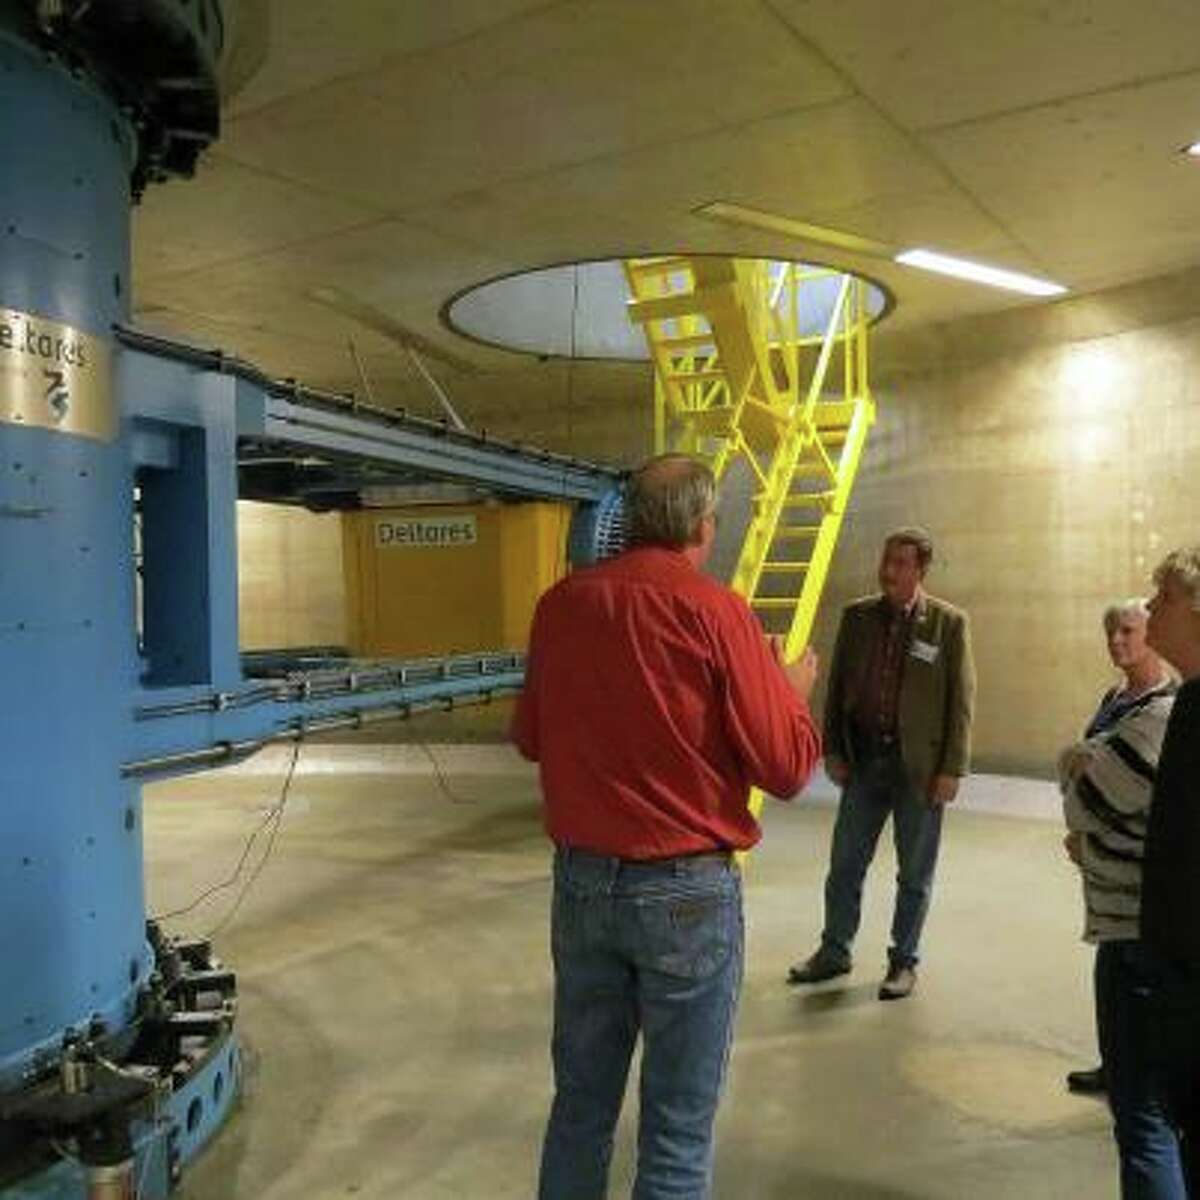 Members of the Galveston delegation tour the centrifuge at the independent Dutch research organization Deltares.